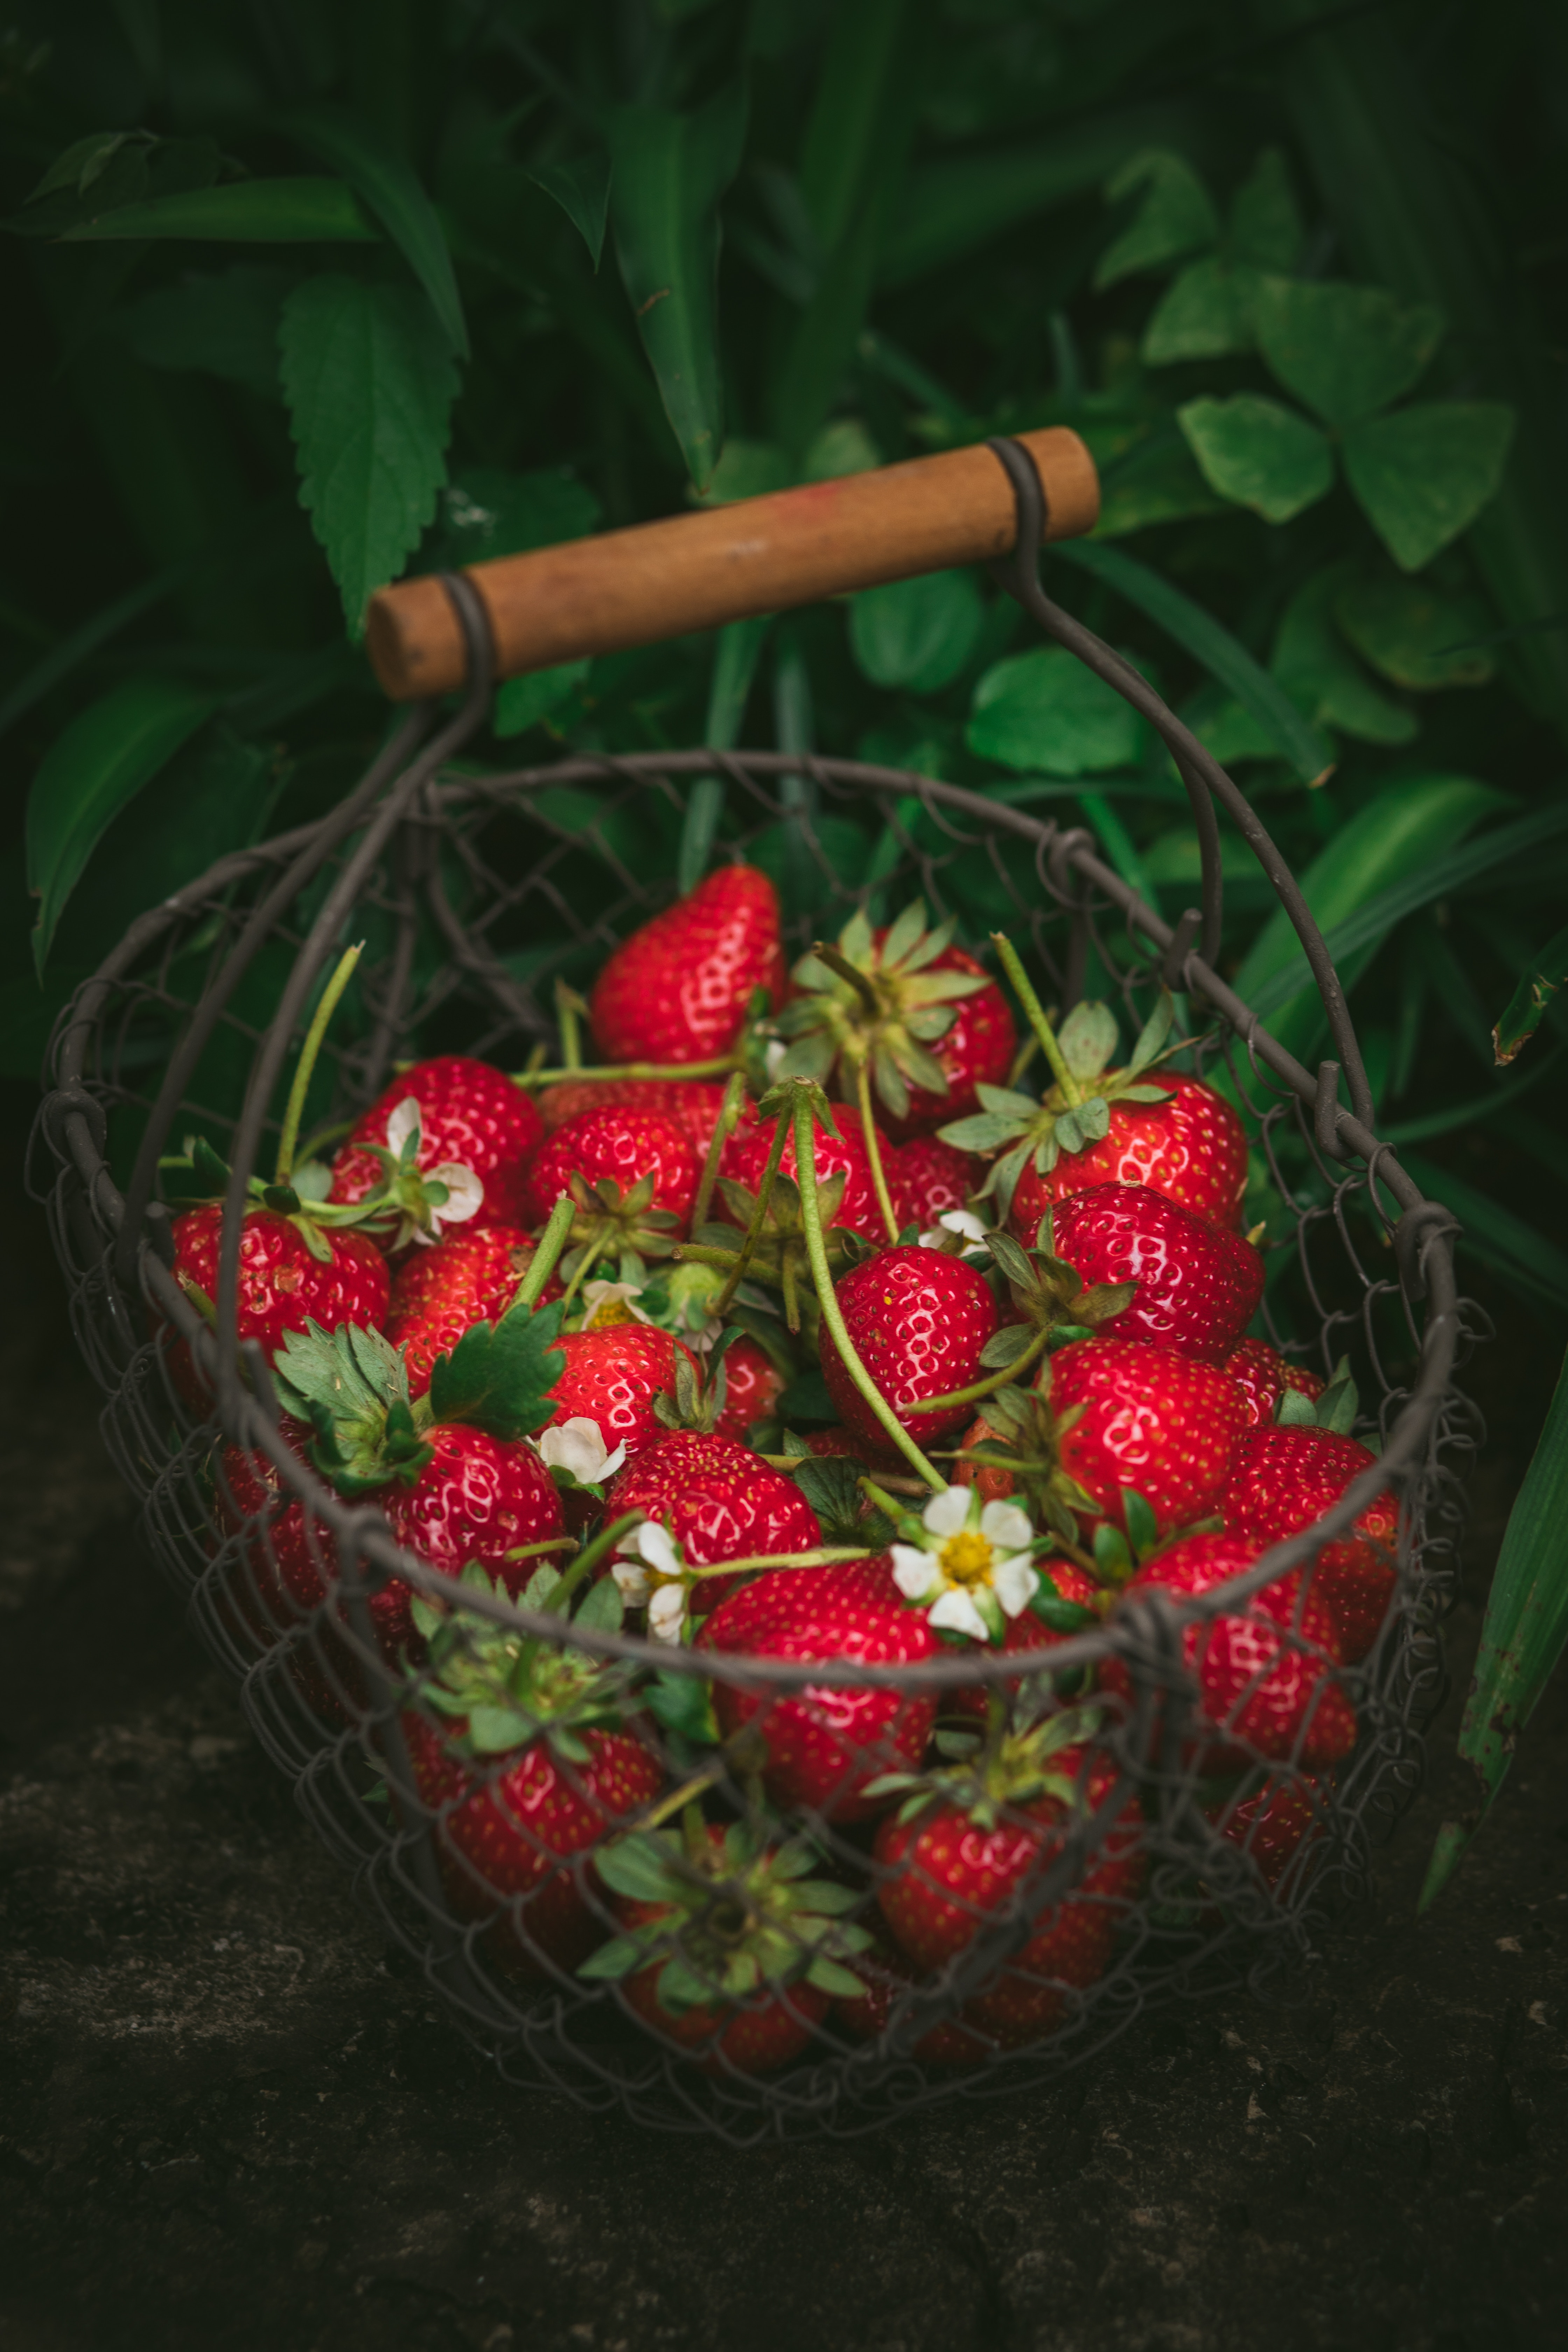 strawberry, berries, fresh, food, red, basket, ripe images